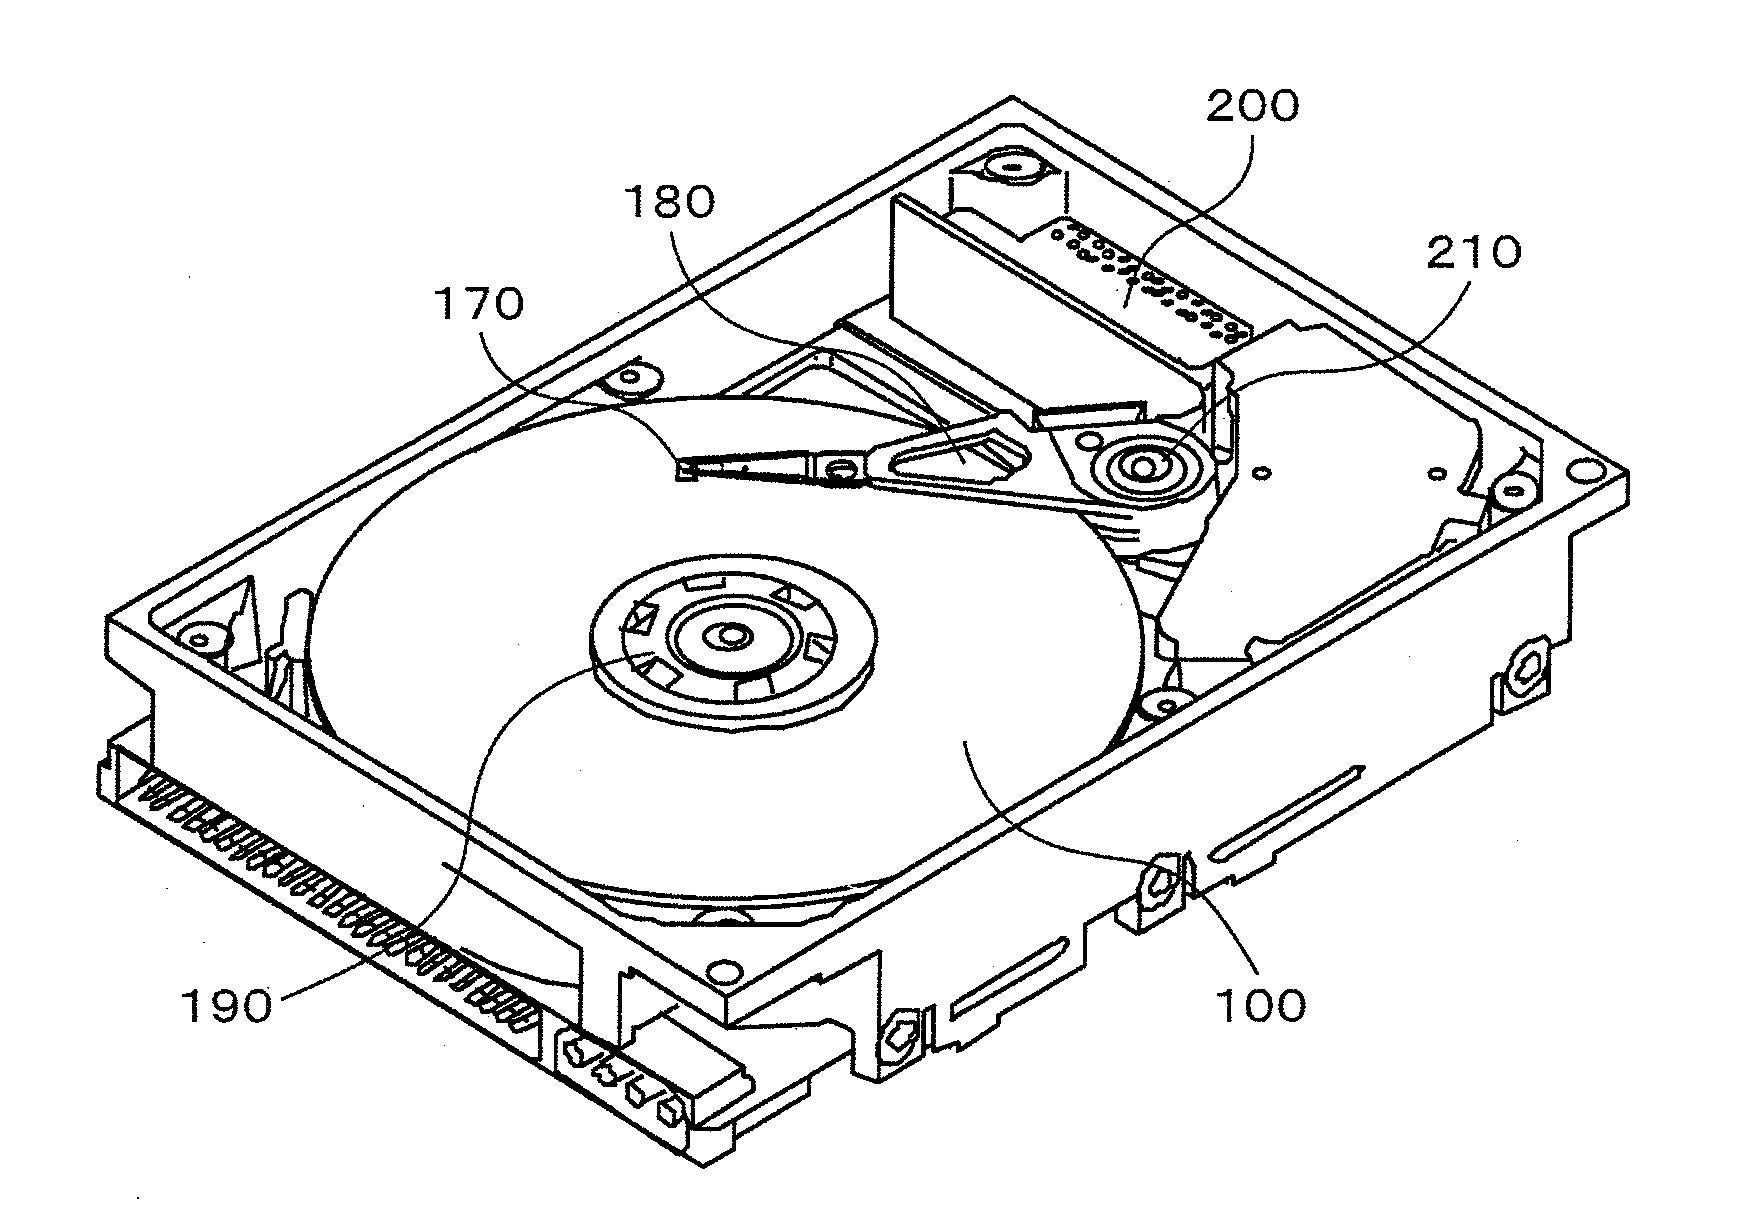 Magnetic recording head, manufacturing method thereof, and magnetic disk device